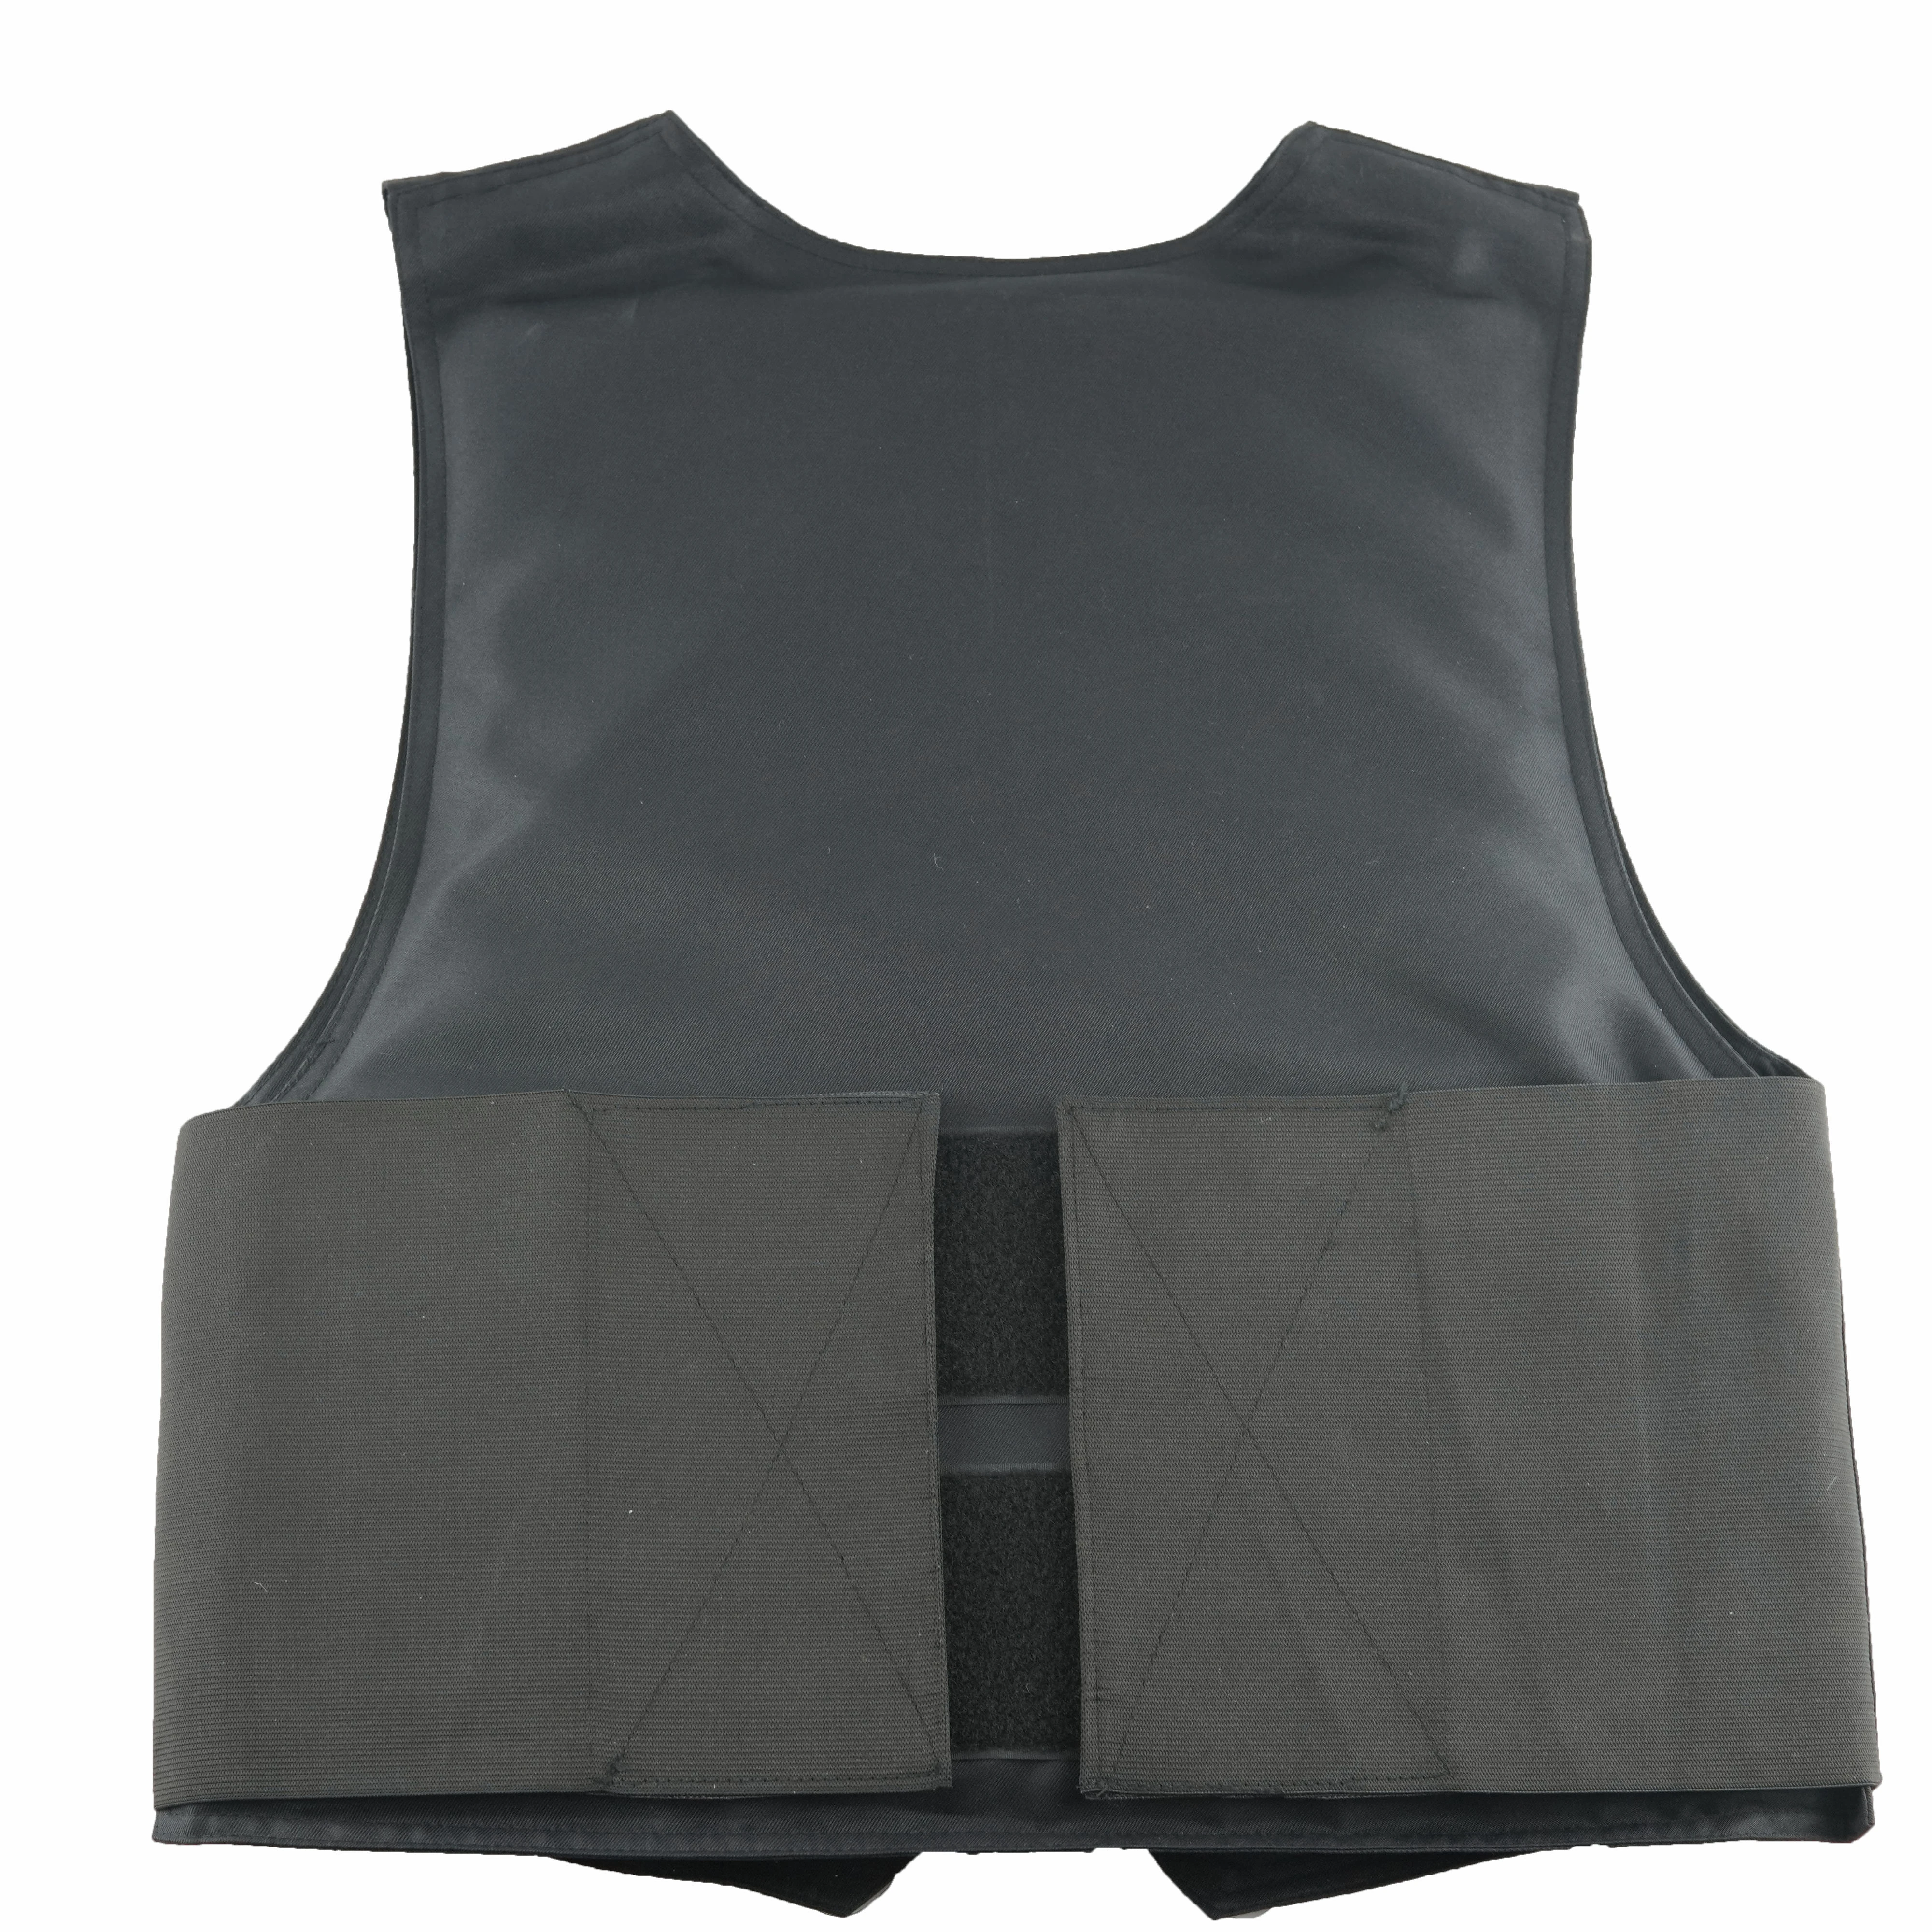 Low price army bullet proof tactical plate carrier vest for 100% safety